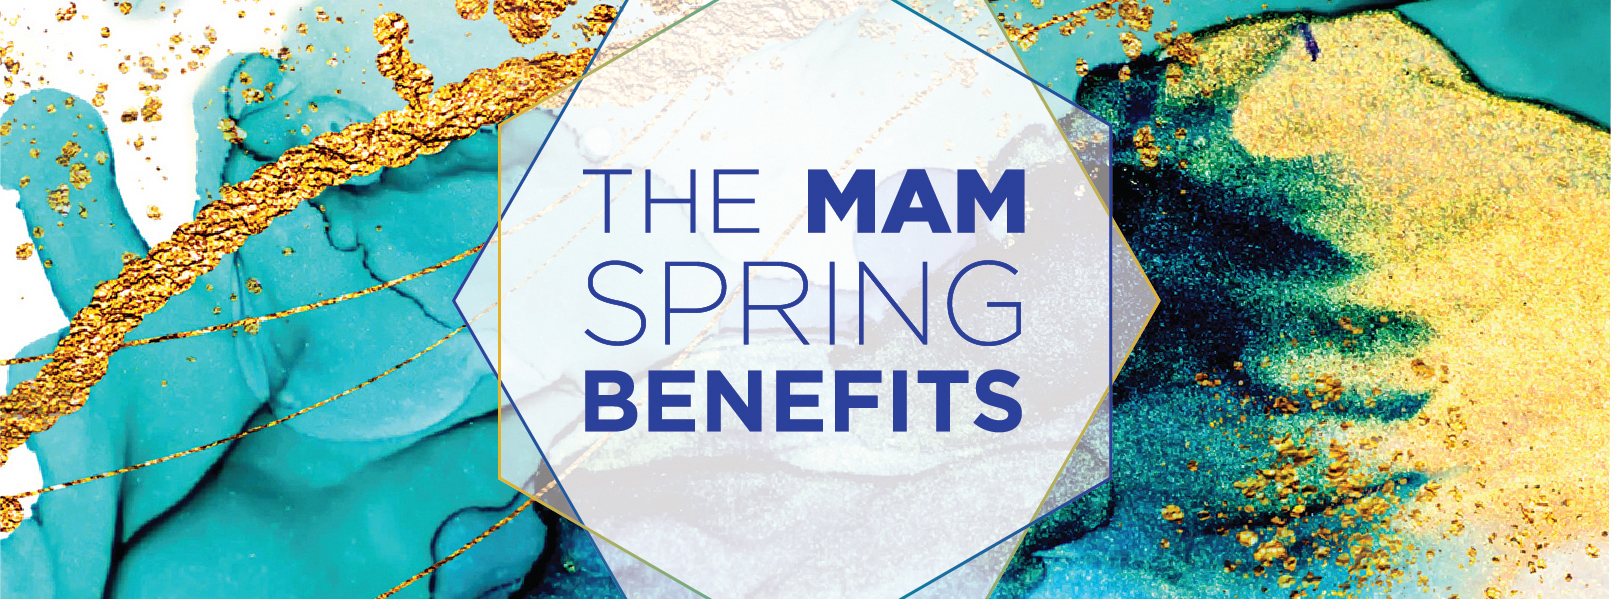 MAM Spring Benefits Promotional Graphic